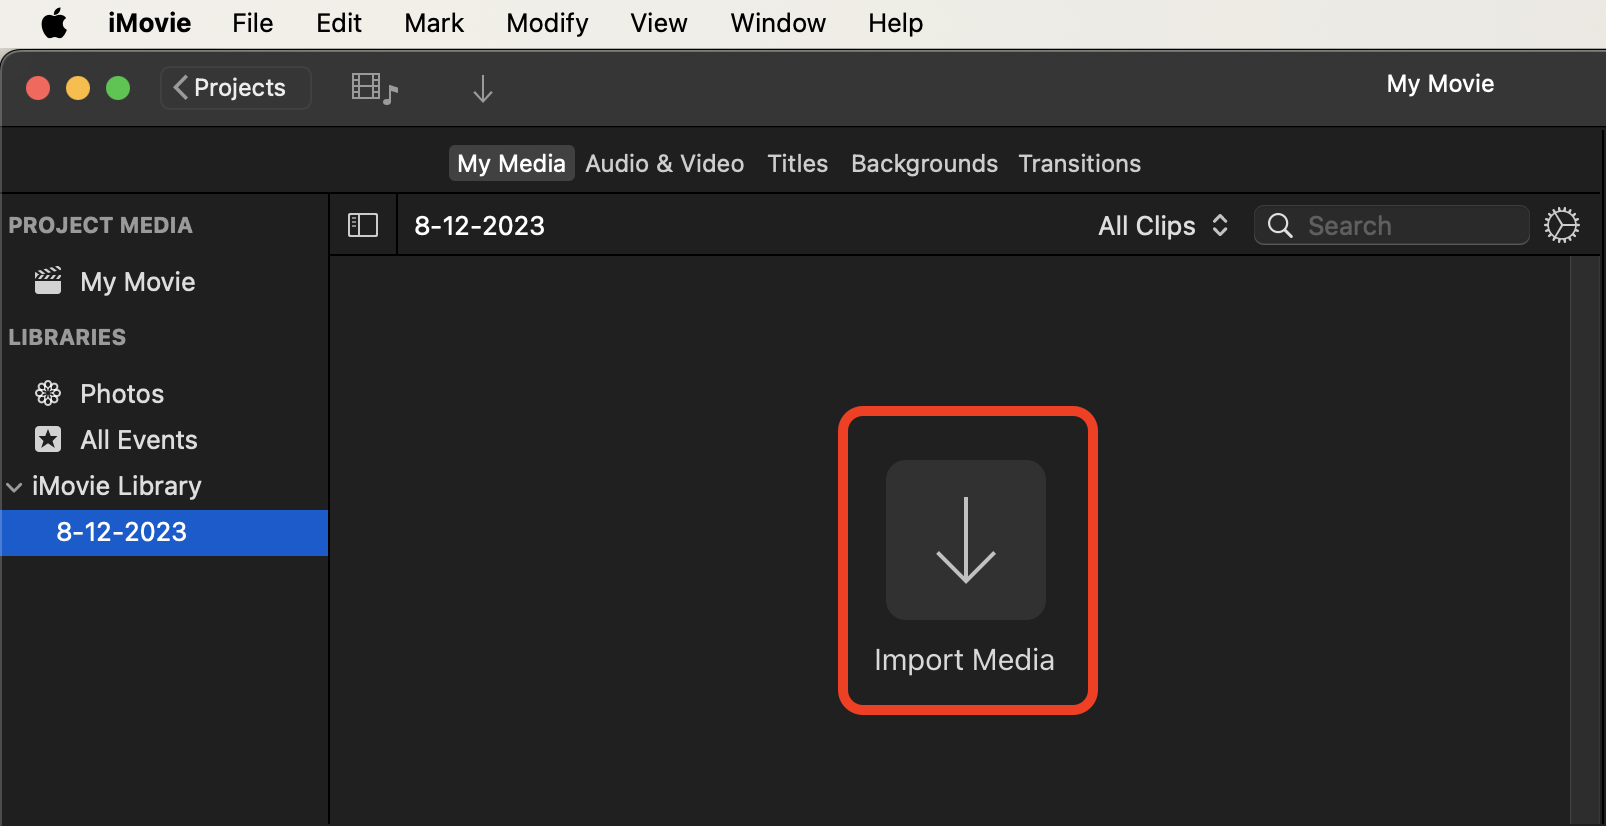 How To Reduce Video Size On Windows Using iMovie: Step 1